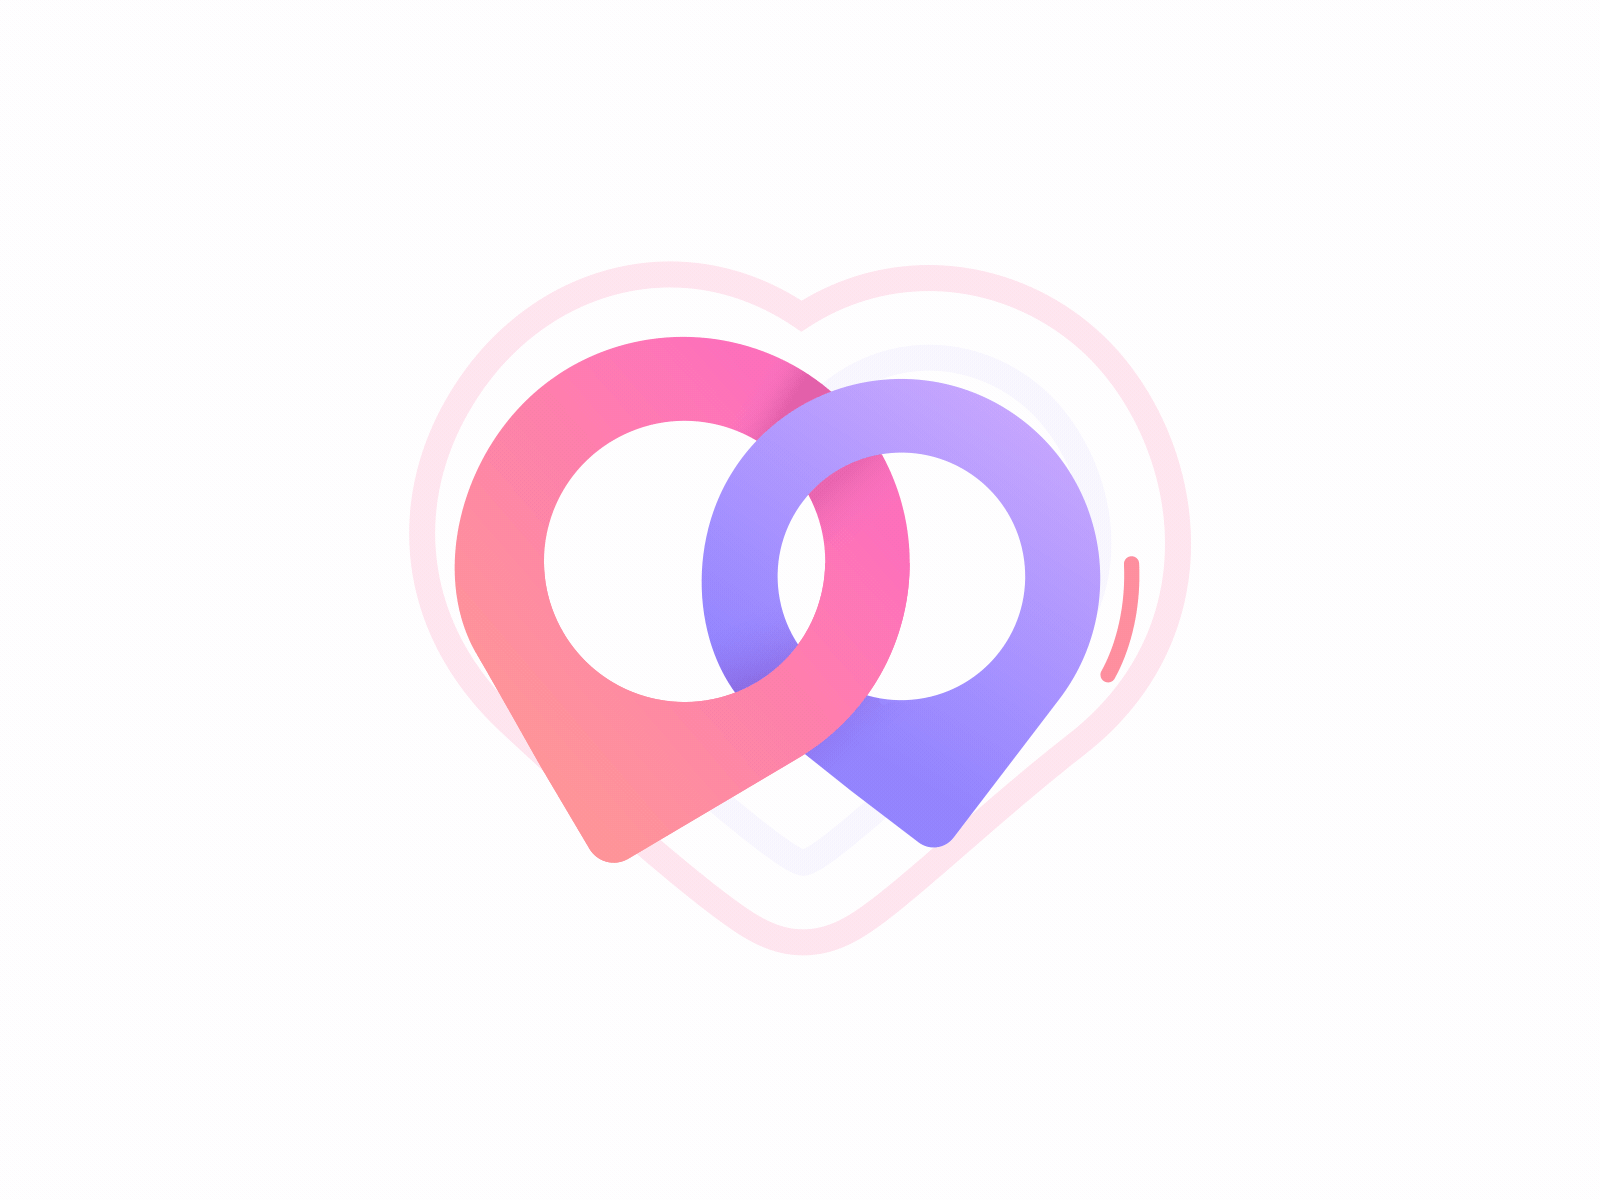 Trill - Logo Animation heart icon motion graphics motion design motion logo animation logo gif branding reveal logo reveal intro animated logo brand animation animation alexgoo after effects ae 2d animation 2d